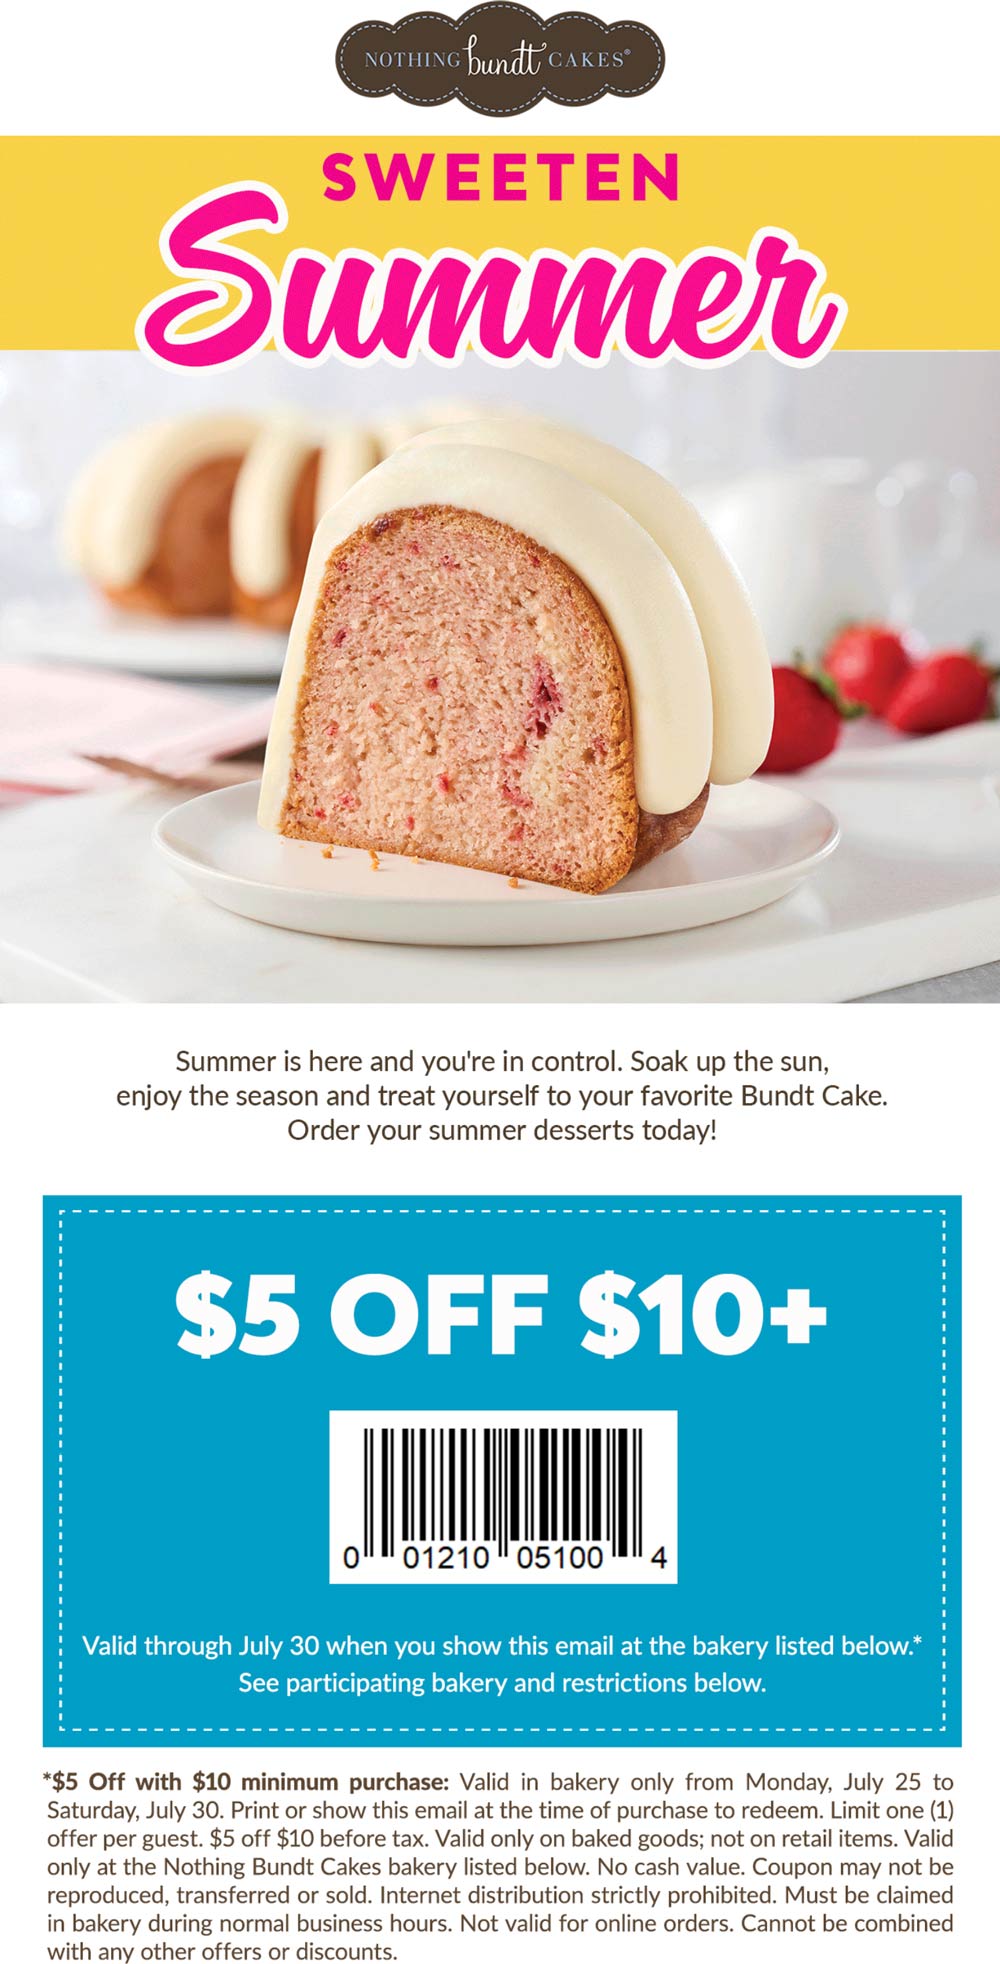 Nothing Bundt Cakes restaurants Coupon  $5 off $10 on dessert cake at Nothing Bundt Cakes #nothingbundtcakes 